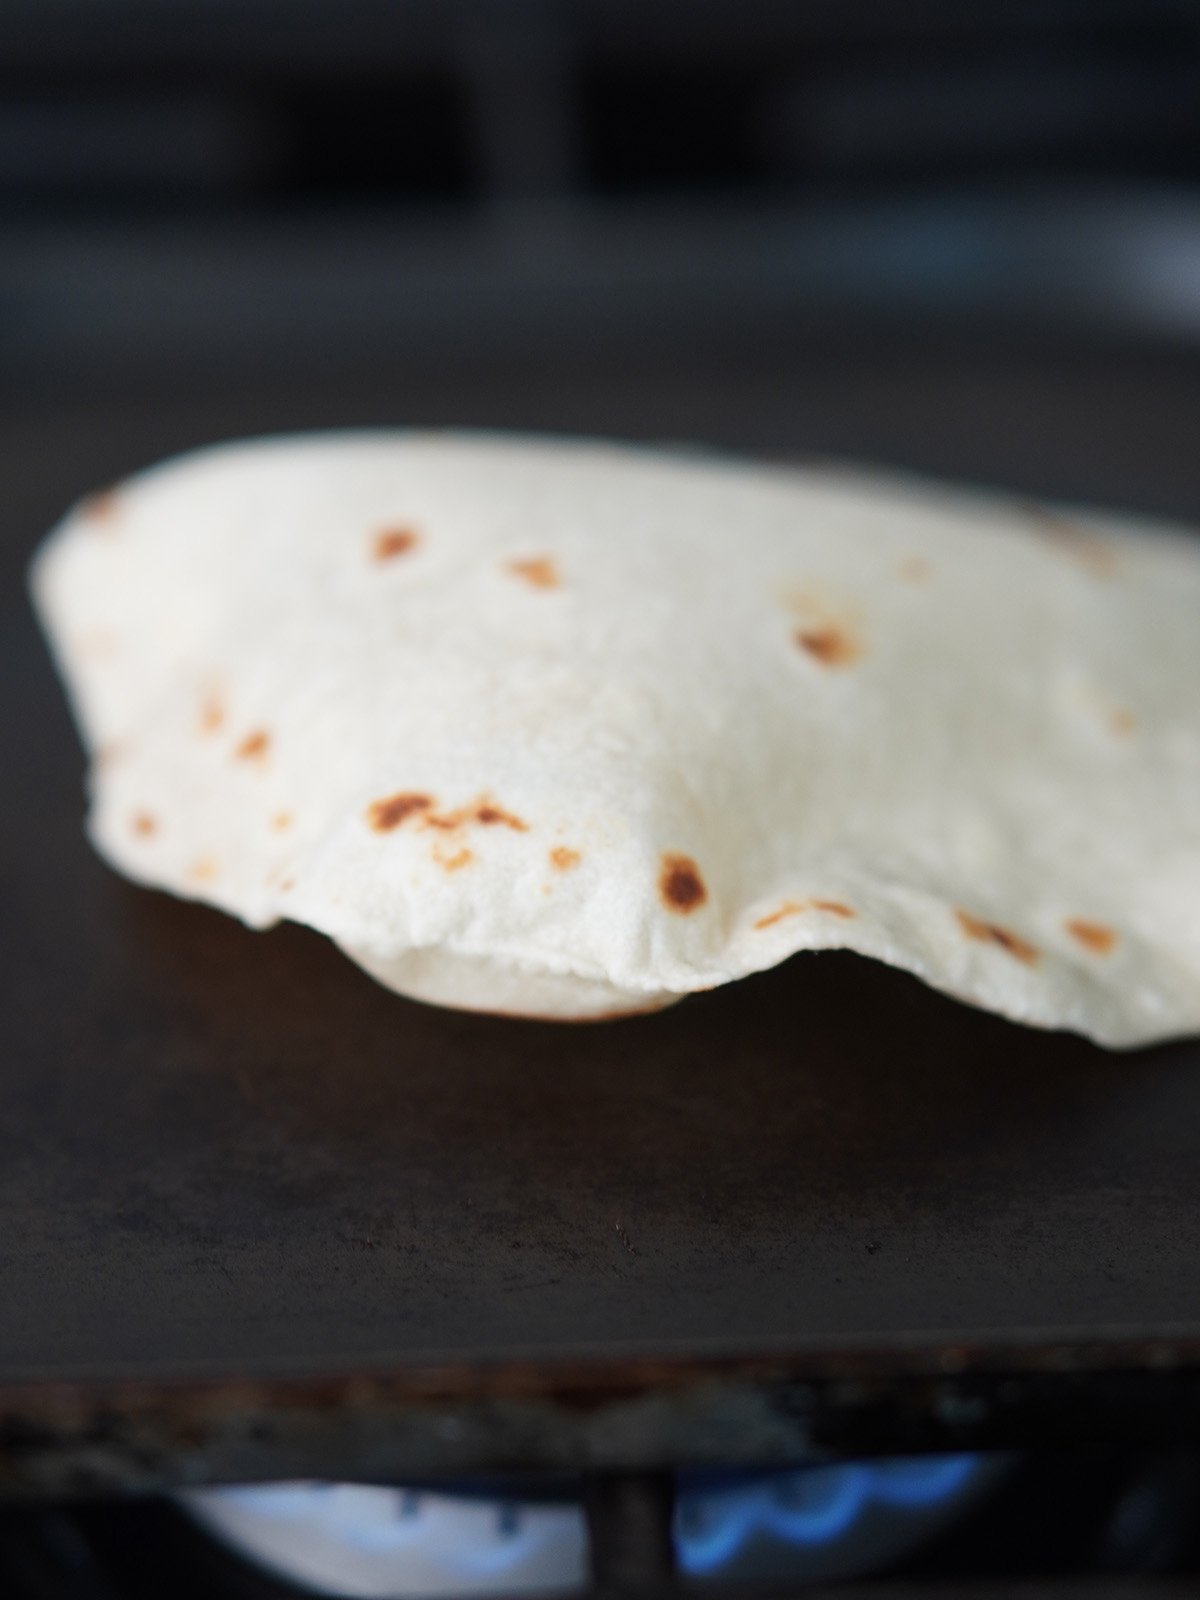 Cooking a tortilla on a skillet.